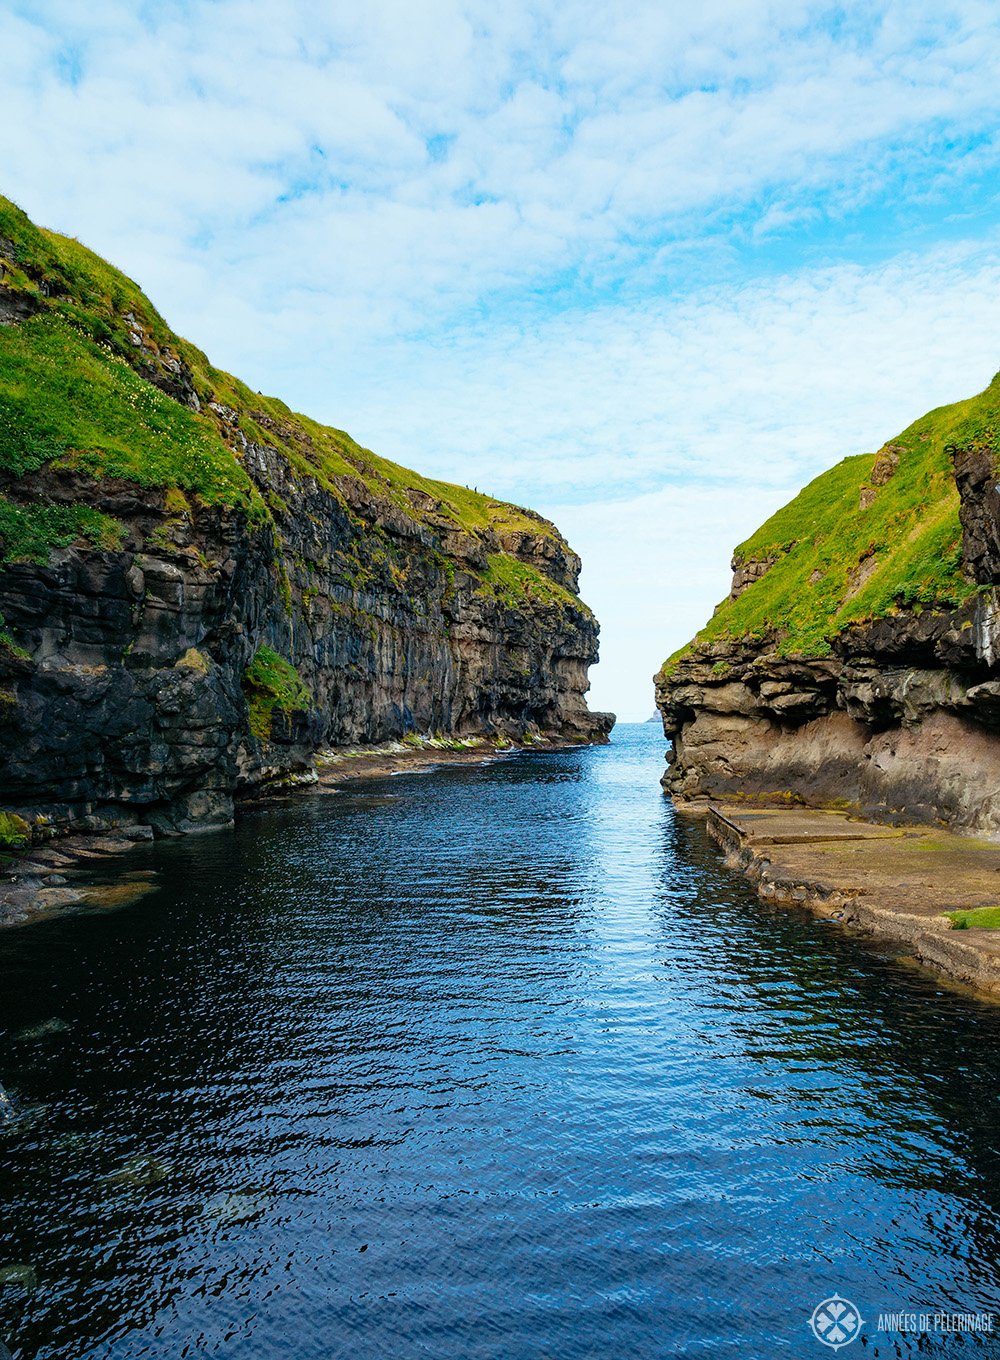 The flooded gorge at the village of Gjógv in Faroe Islands